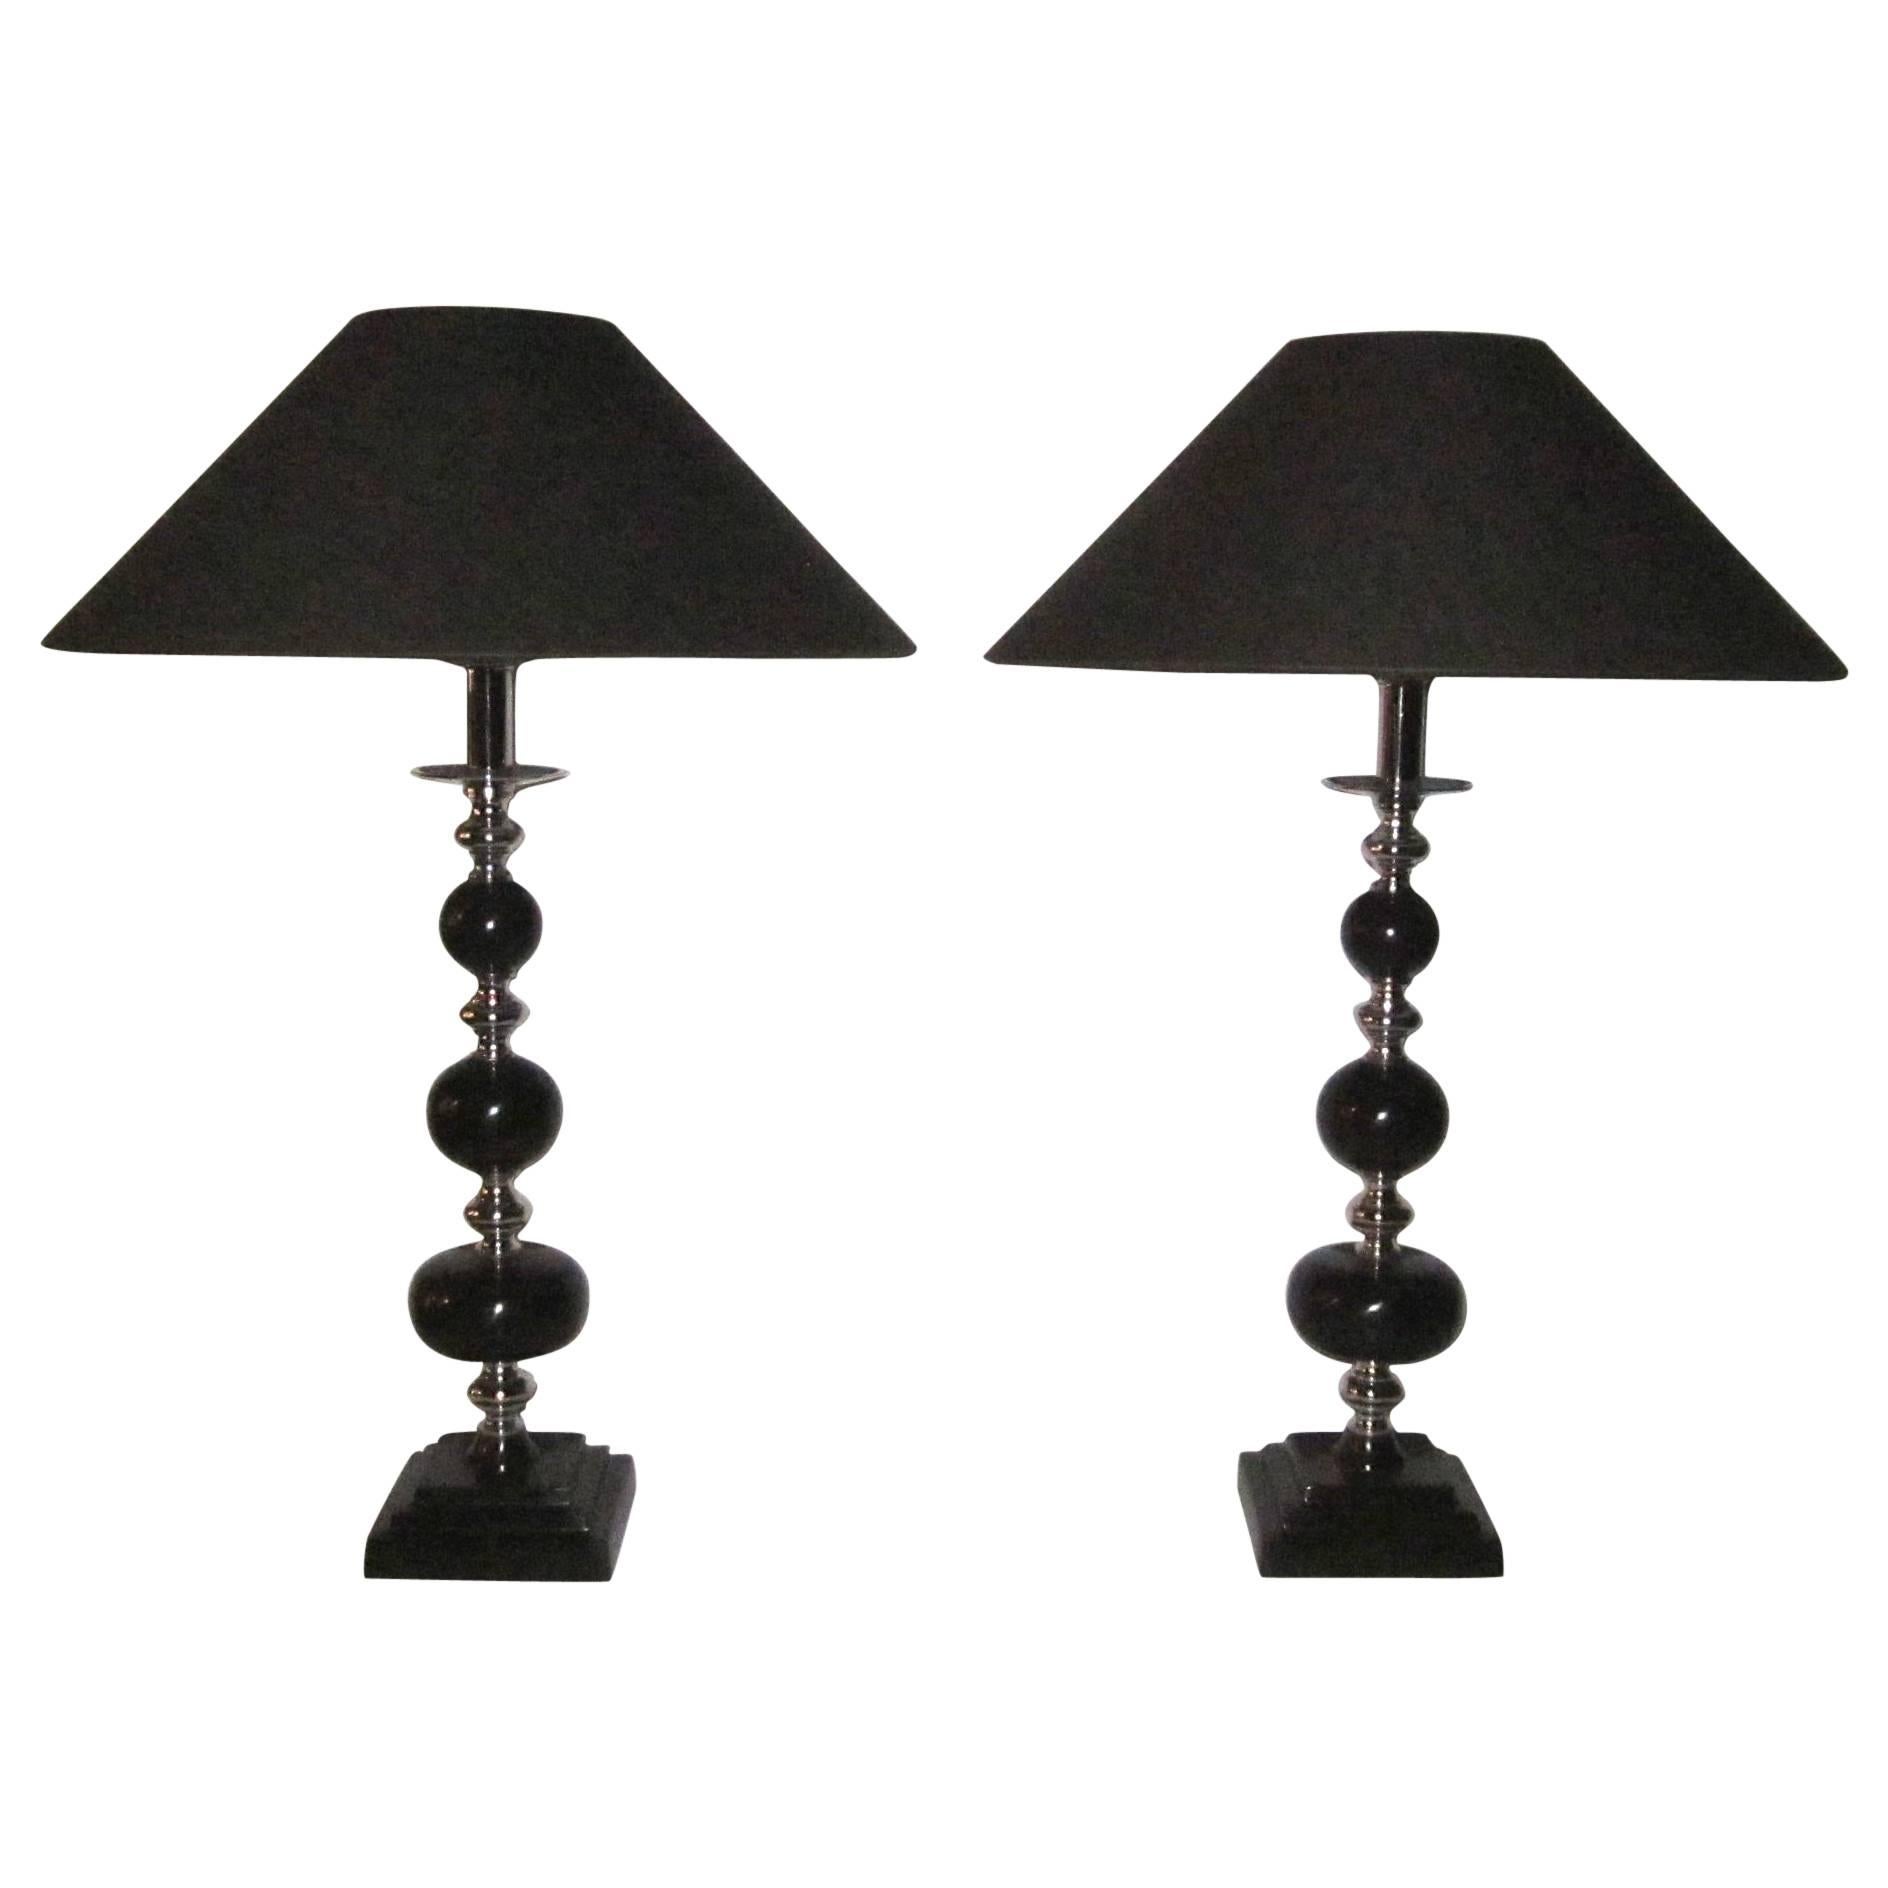 Pair of Bakelite and Chrome Ball Lamps, Contemporary For Sale